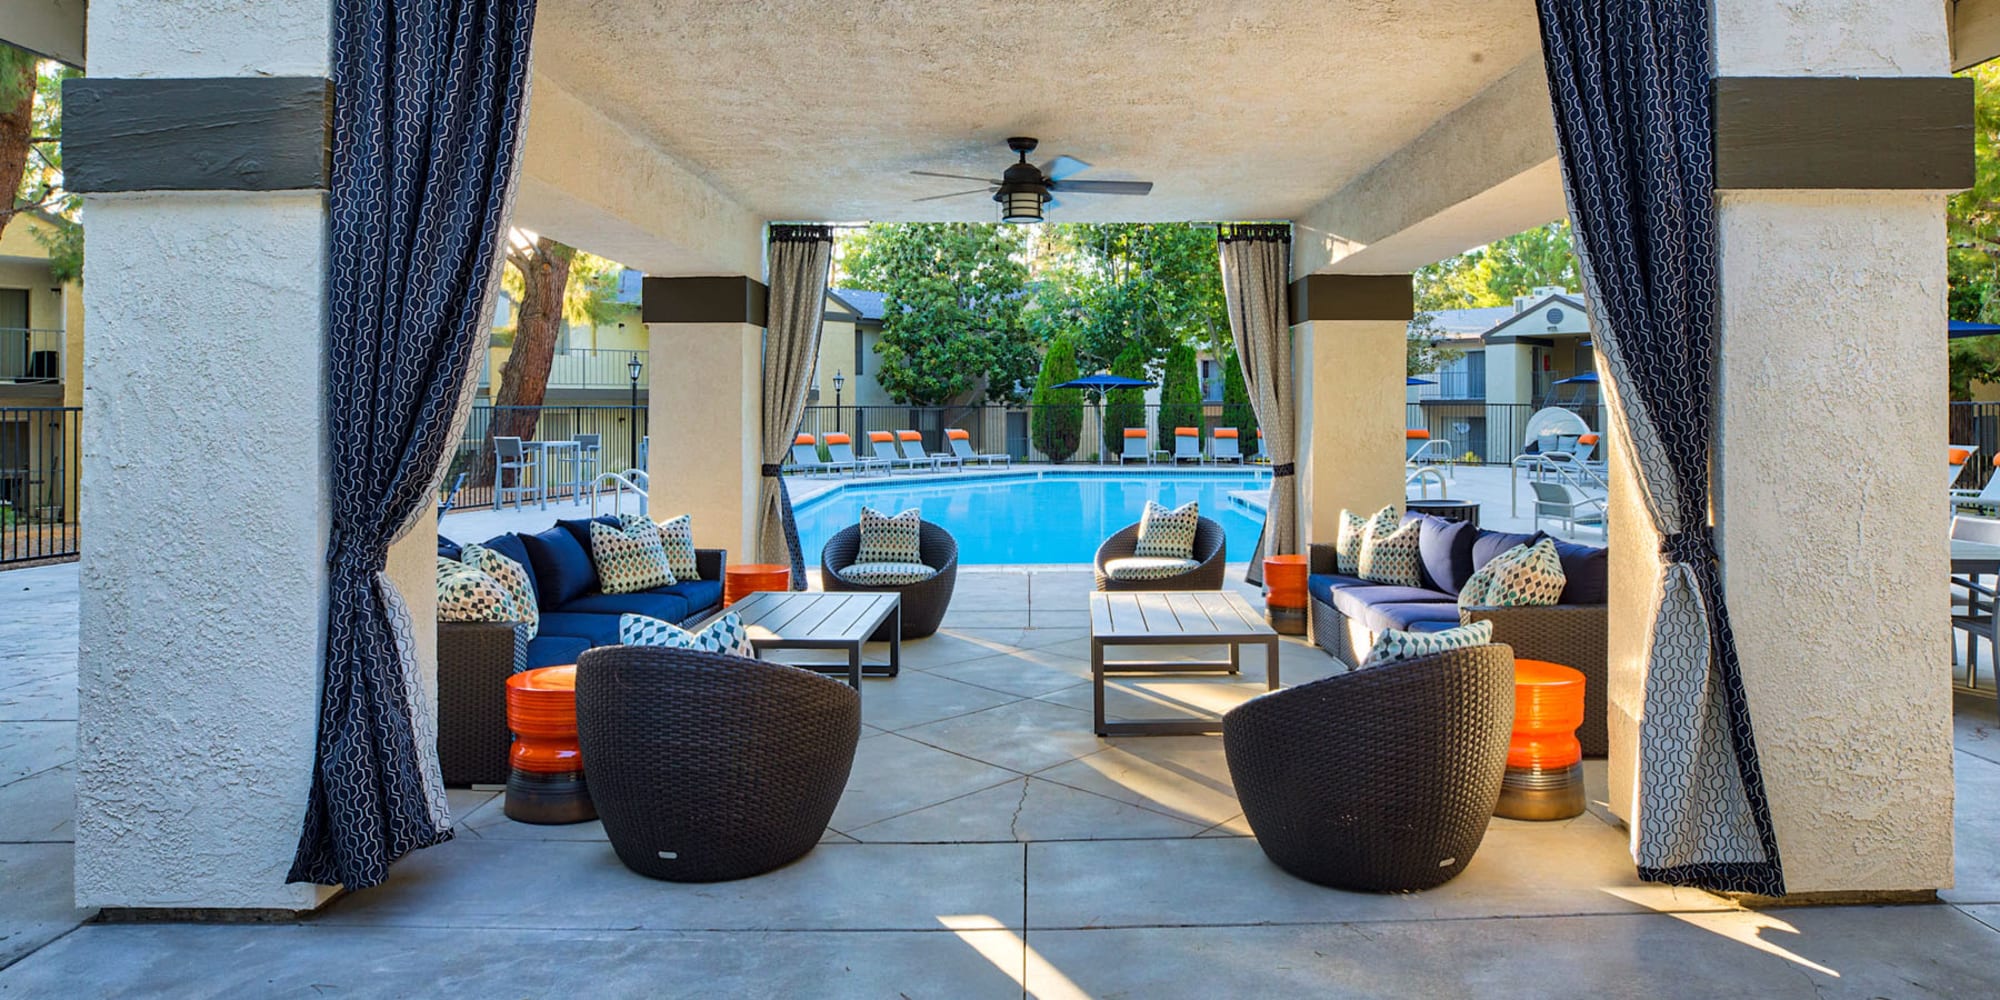 Covered outdoor lounge area with a ceiling fan near the pool at Mountain Vista in Victorville, California